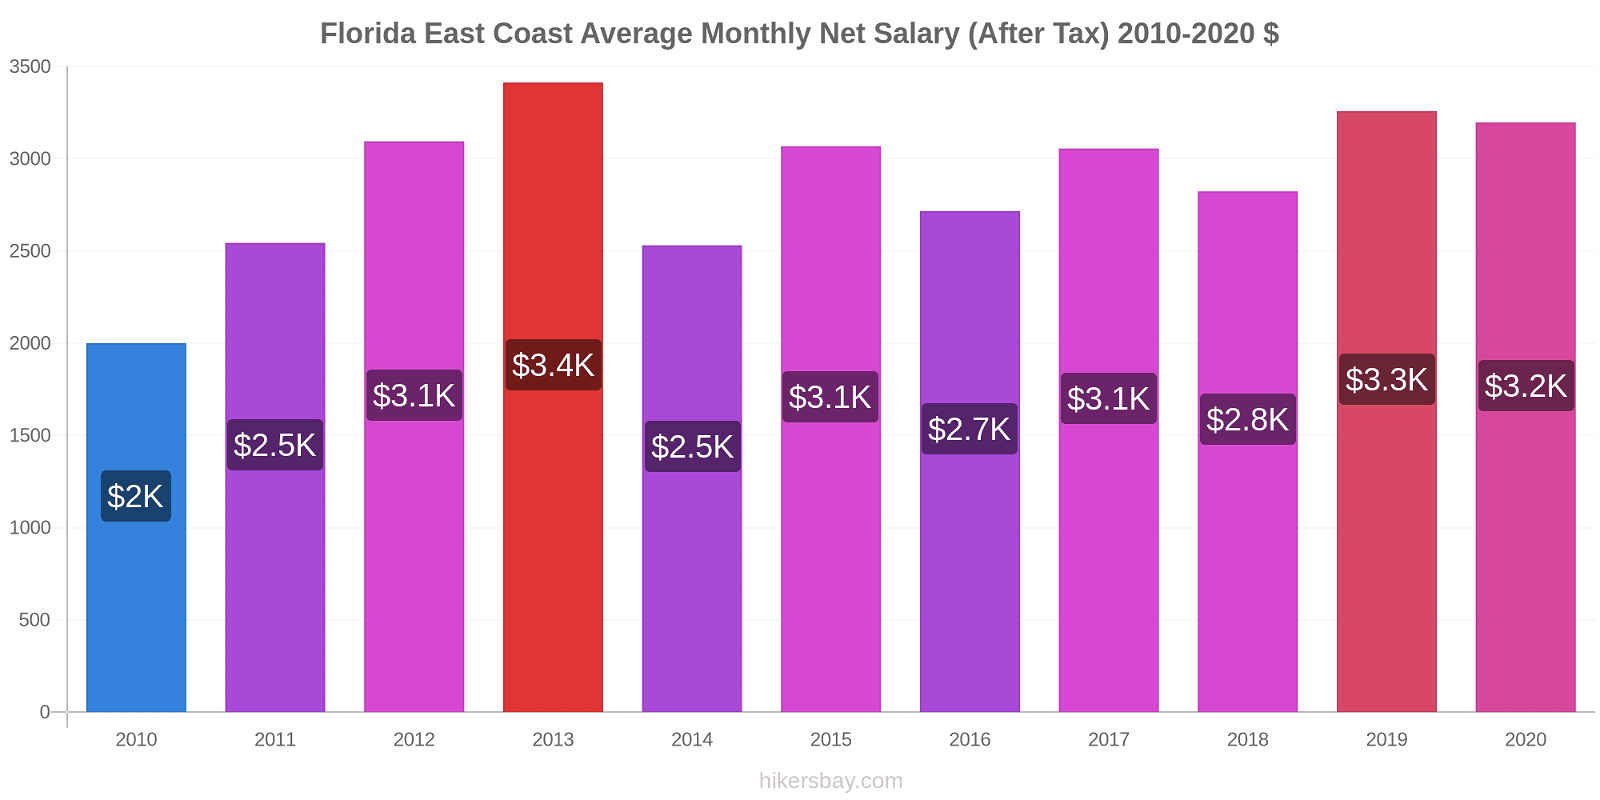 Florida East Coast price changes Average Monthly Net Salary (After Tax) hikersbay.com